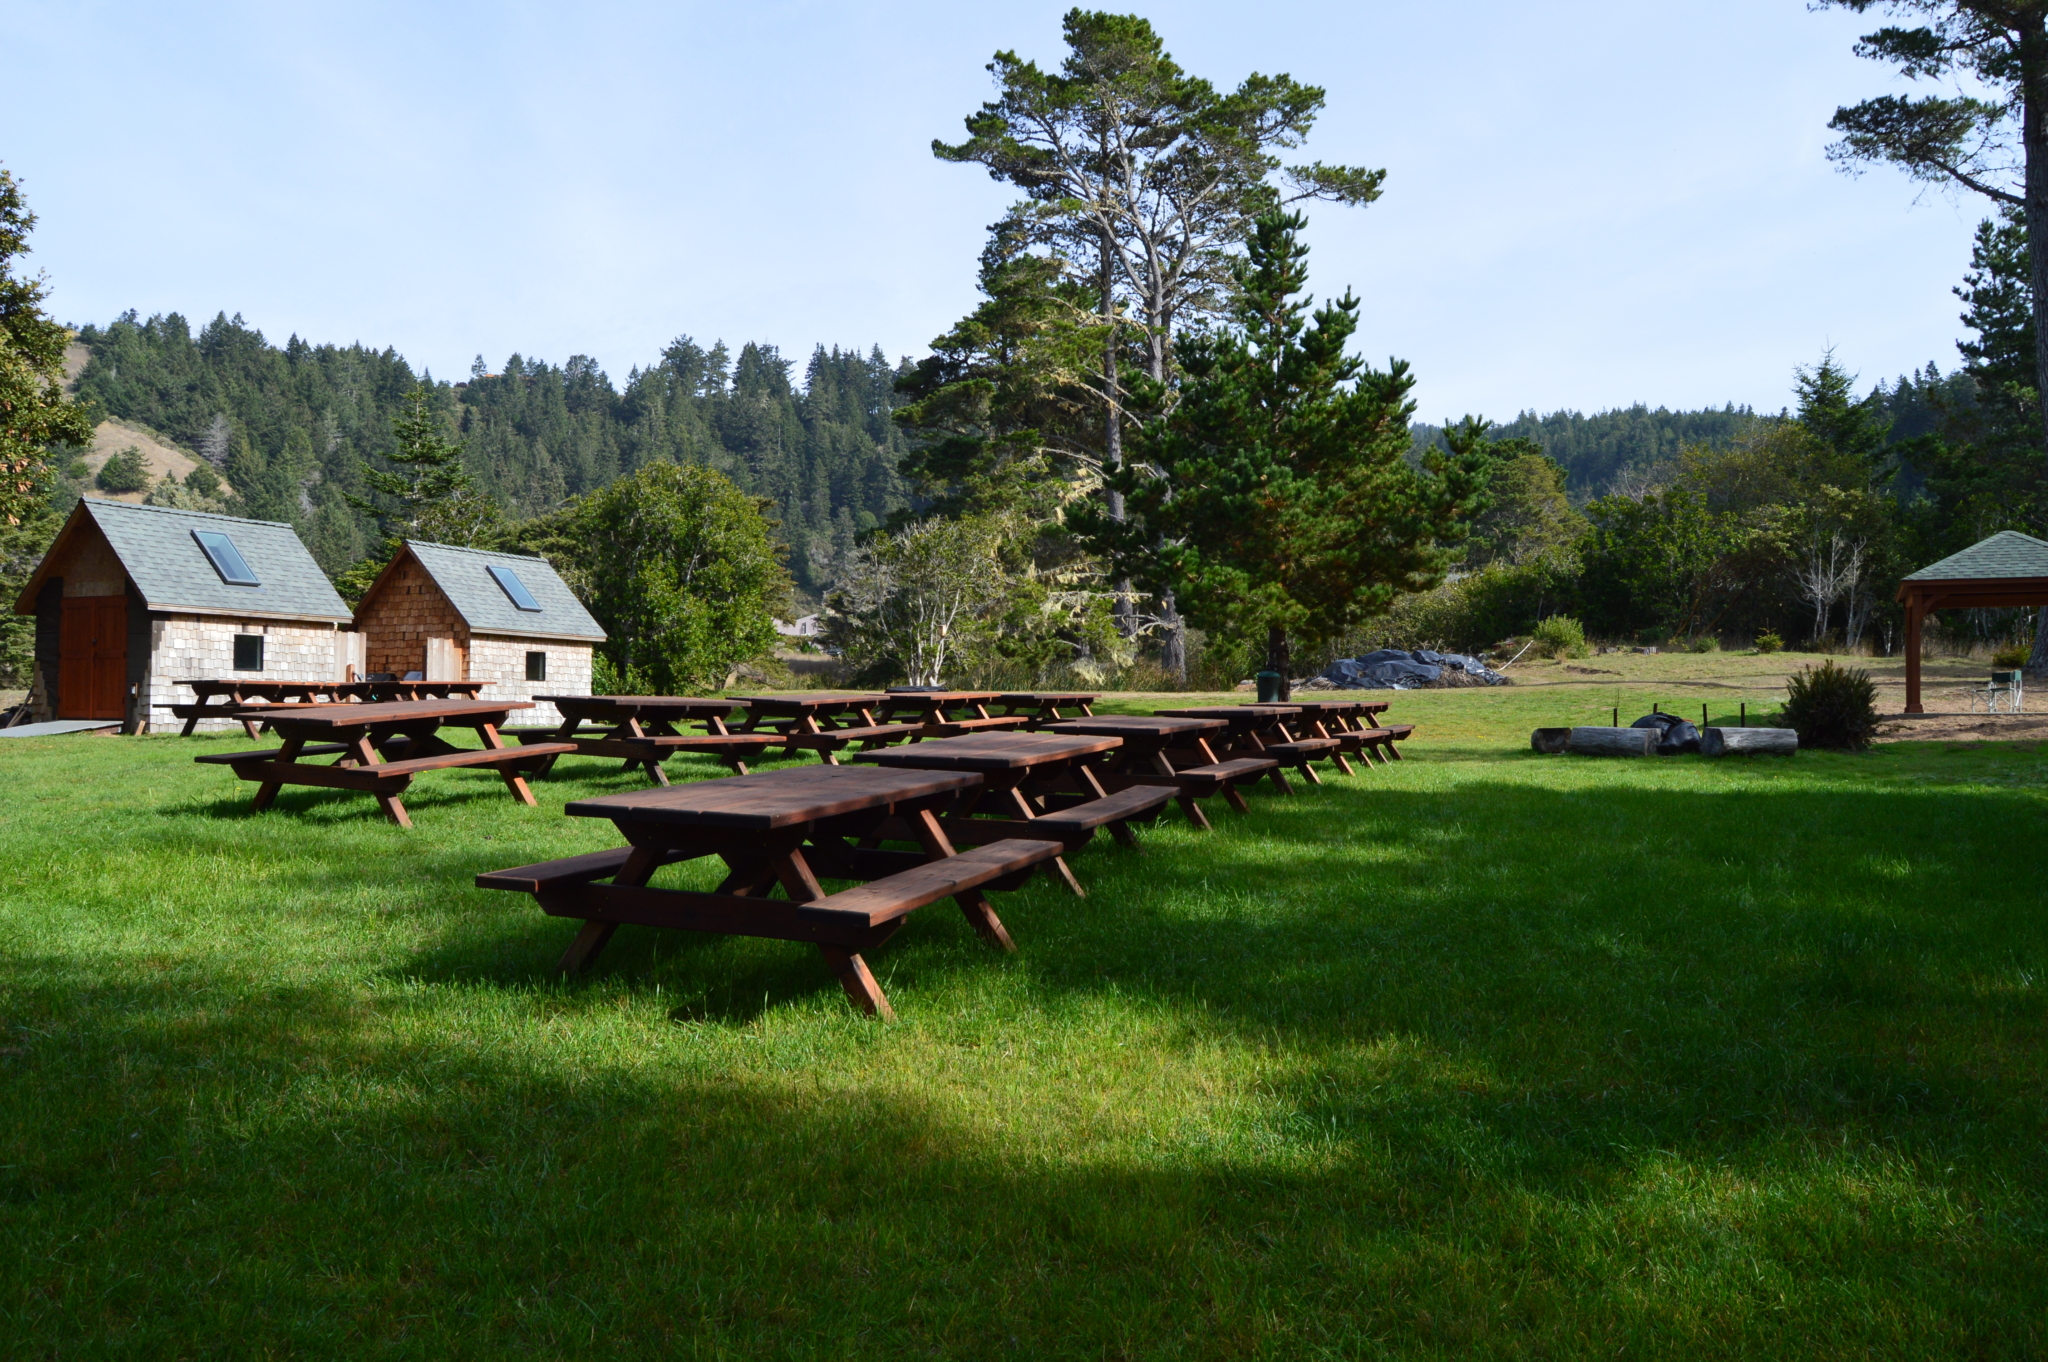 Group of picnic tables in a park on a clear day